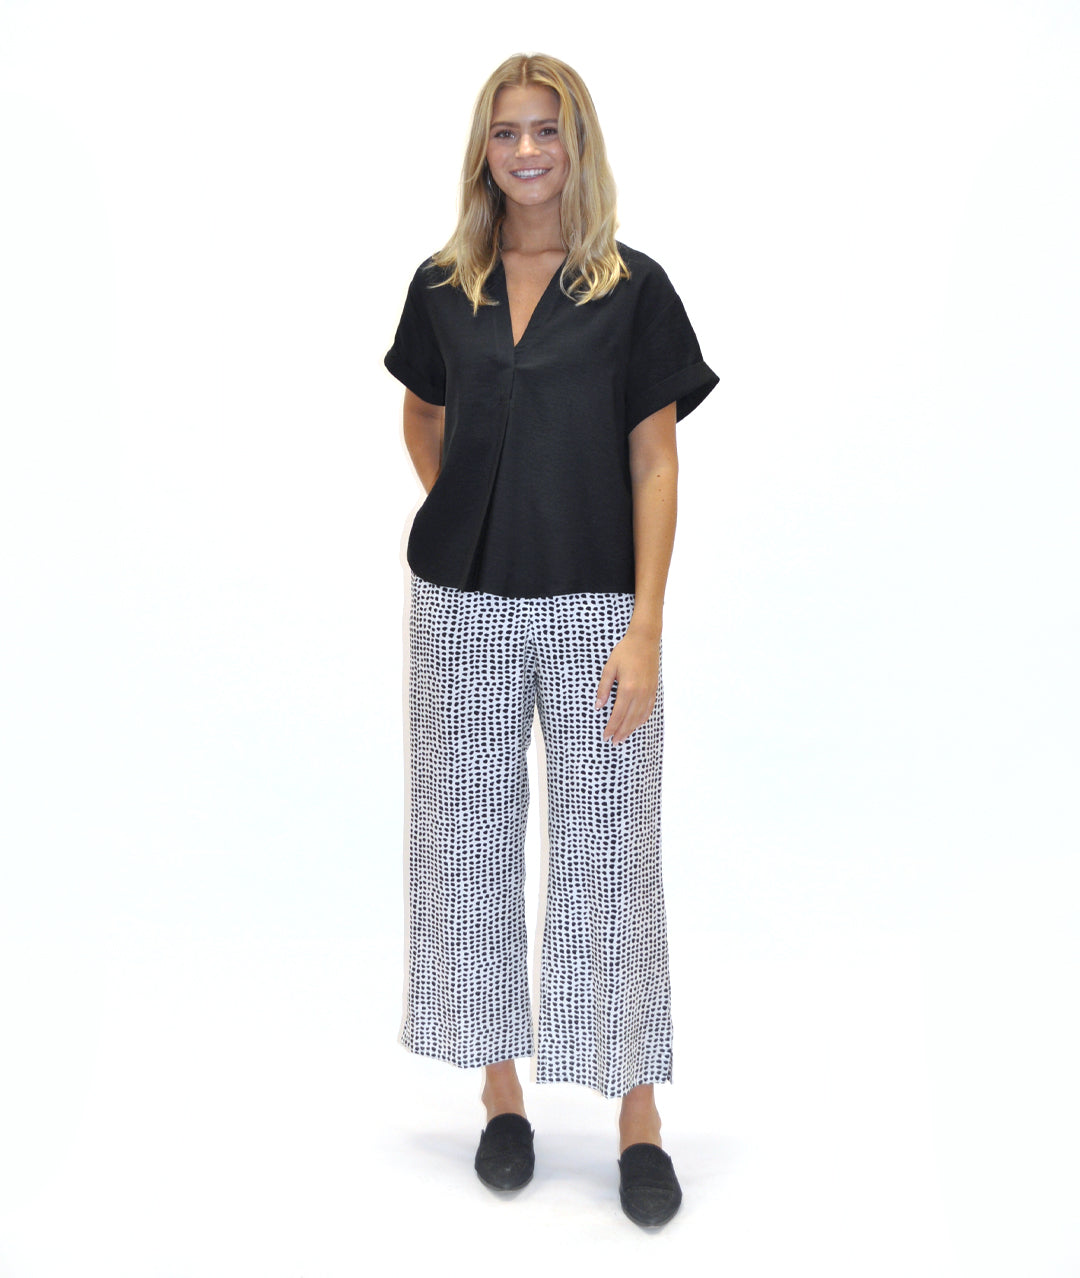 model in a black a white dot print pant with a solid black top with a vneck and pleat down the center front